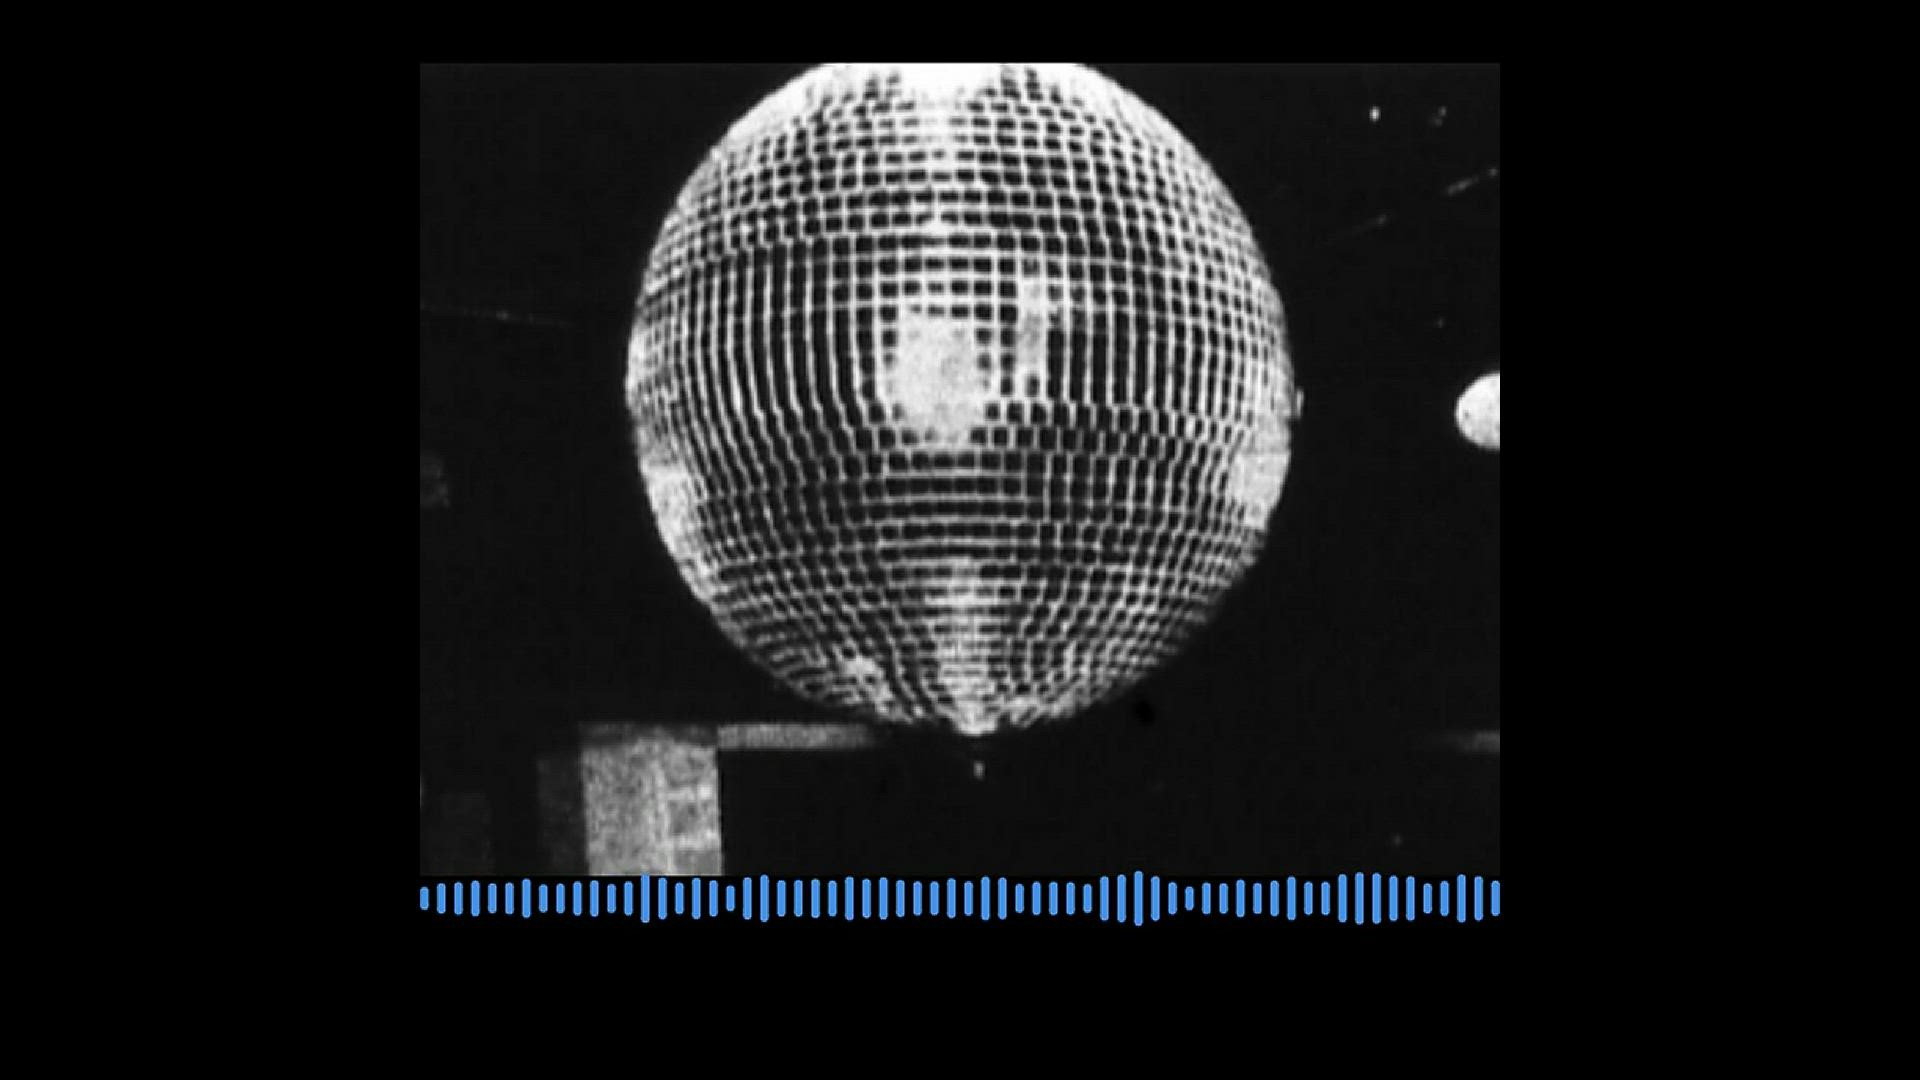 Do you remember dancing the night away at a disco?